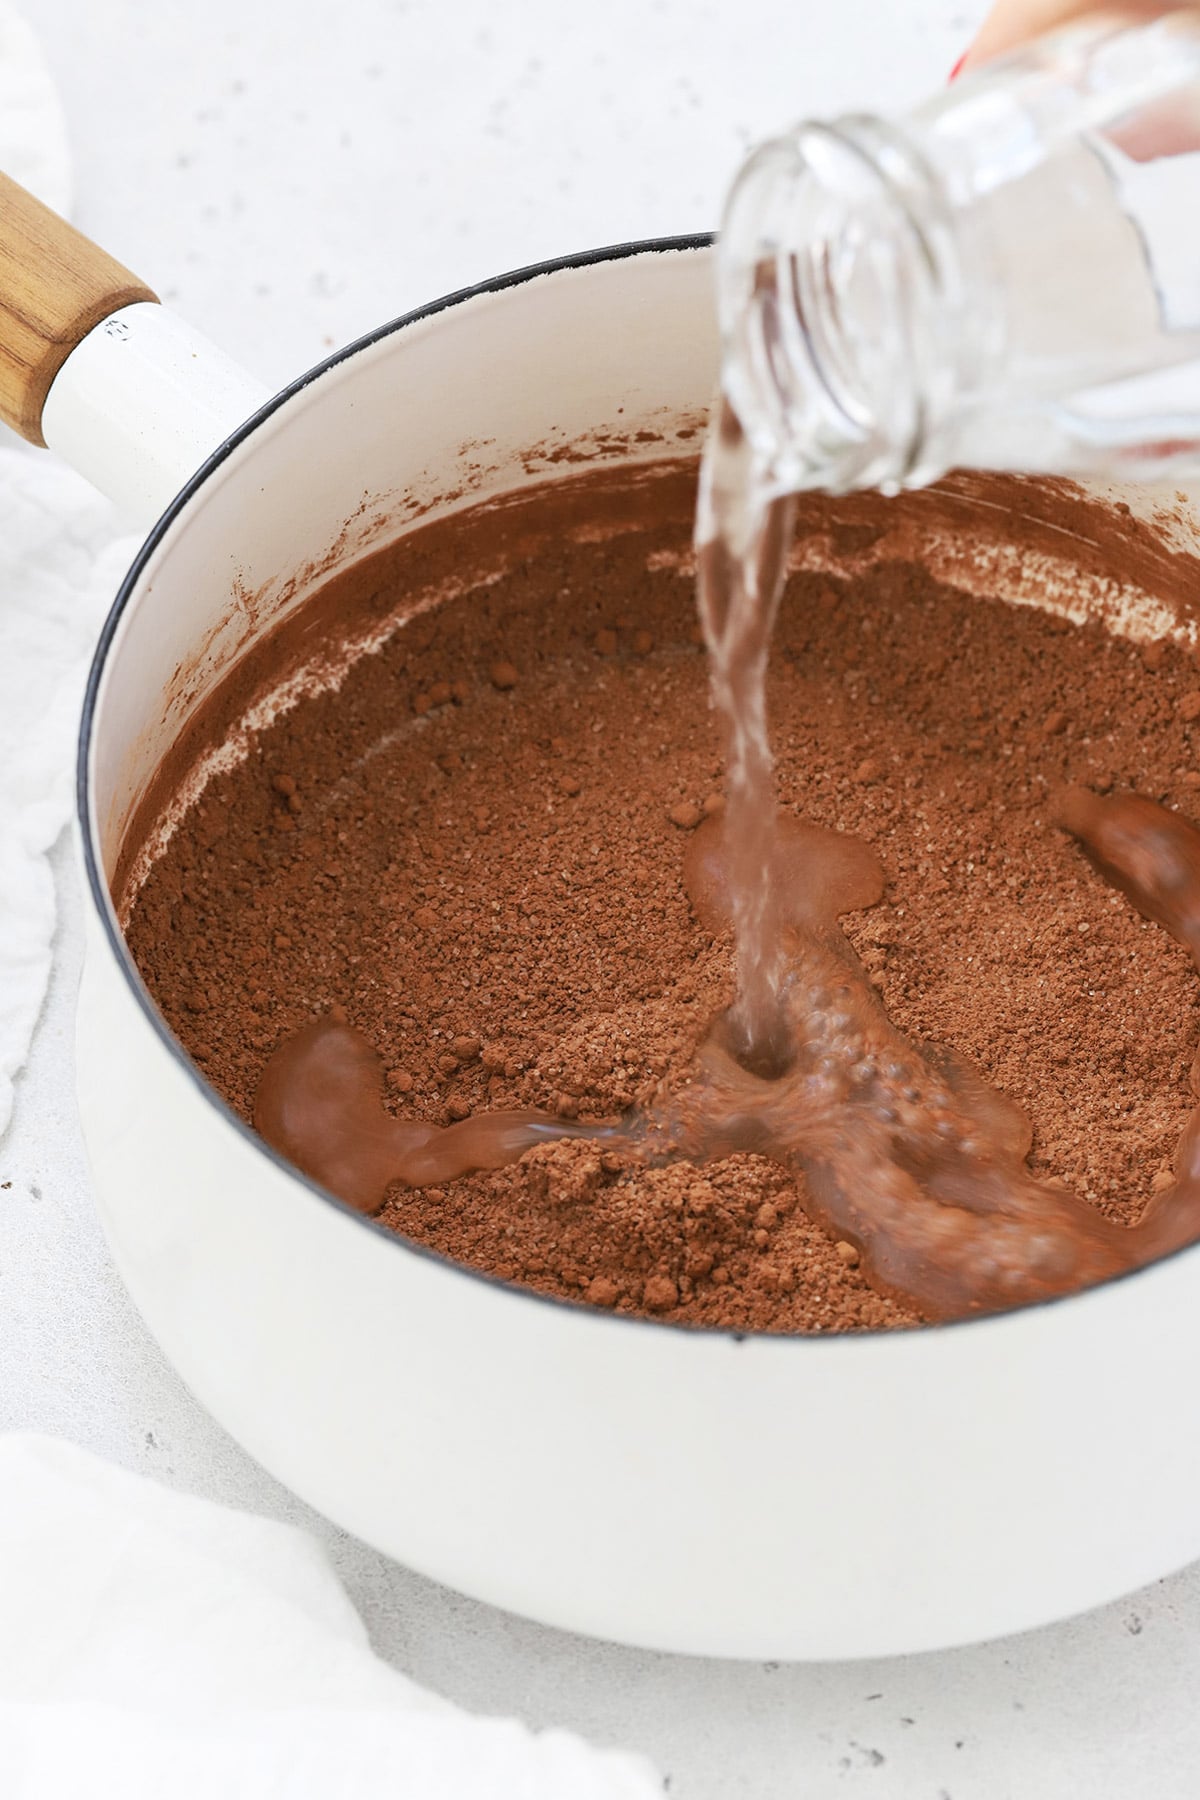 adding water to the dry ingredients to make homemade chocolate syrup